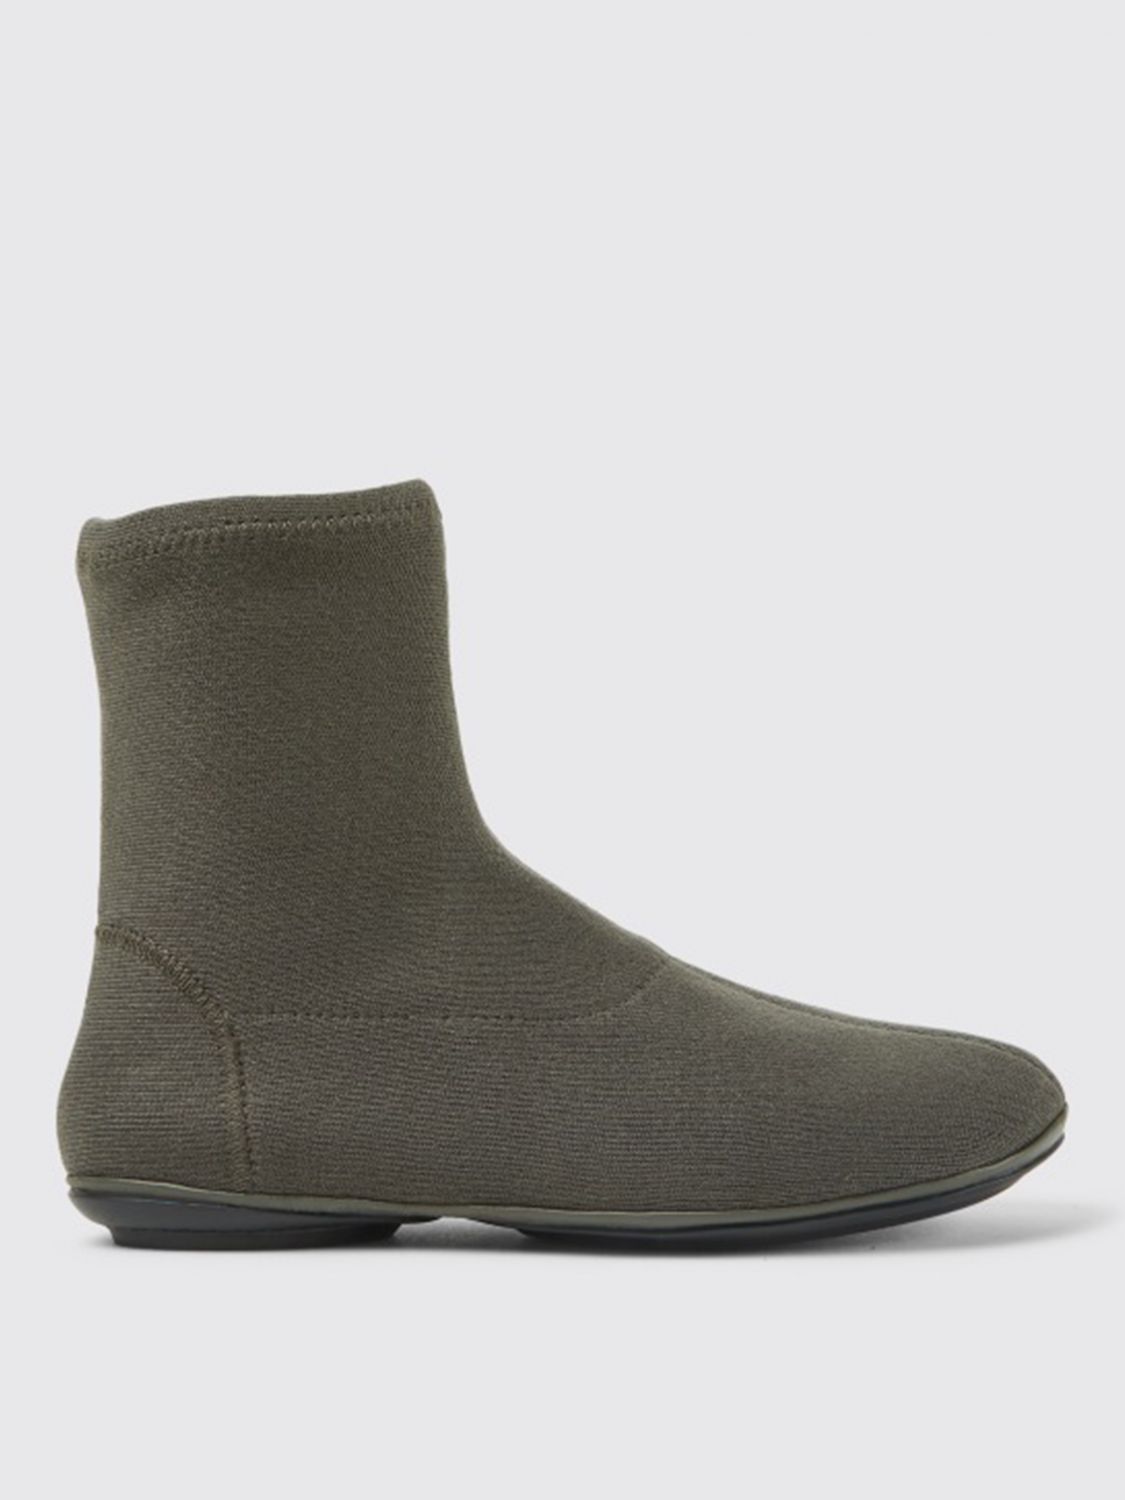 right camper ankle boots in technical fabric